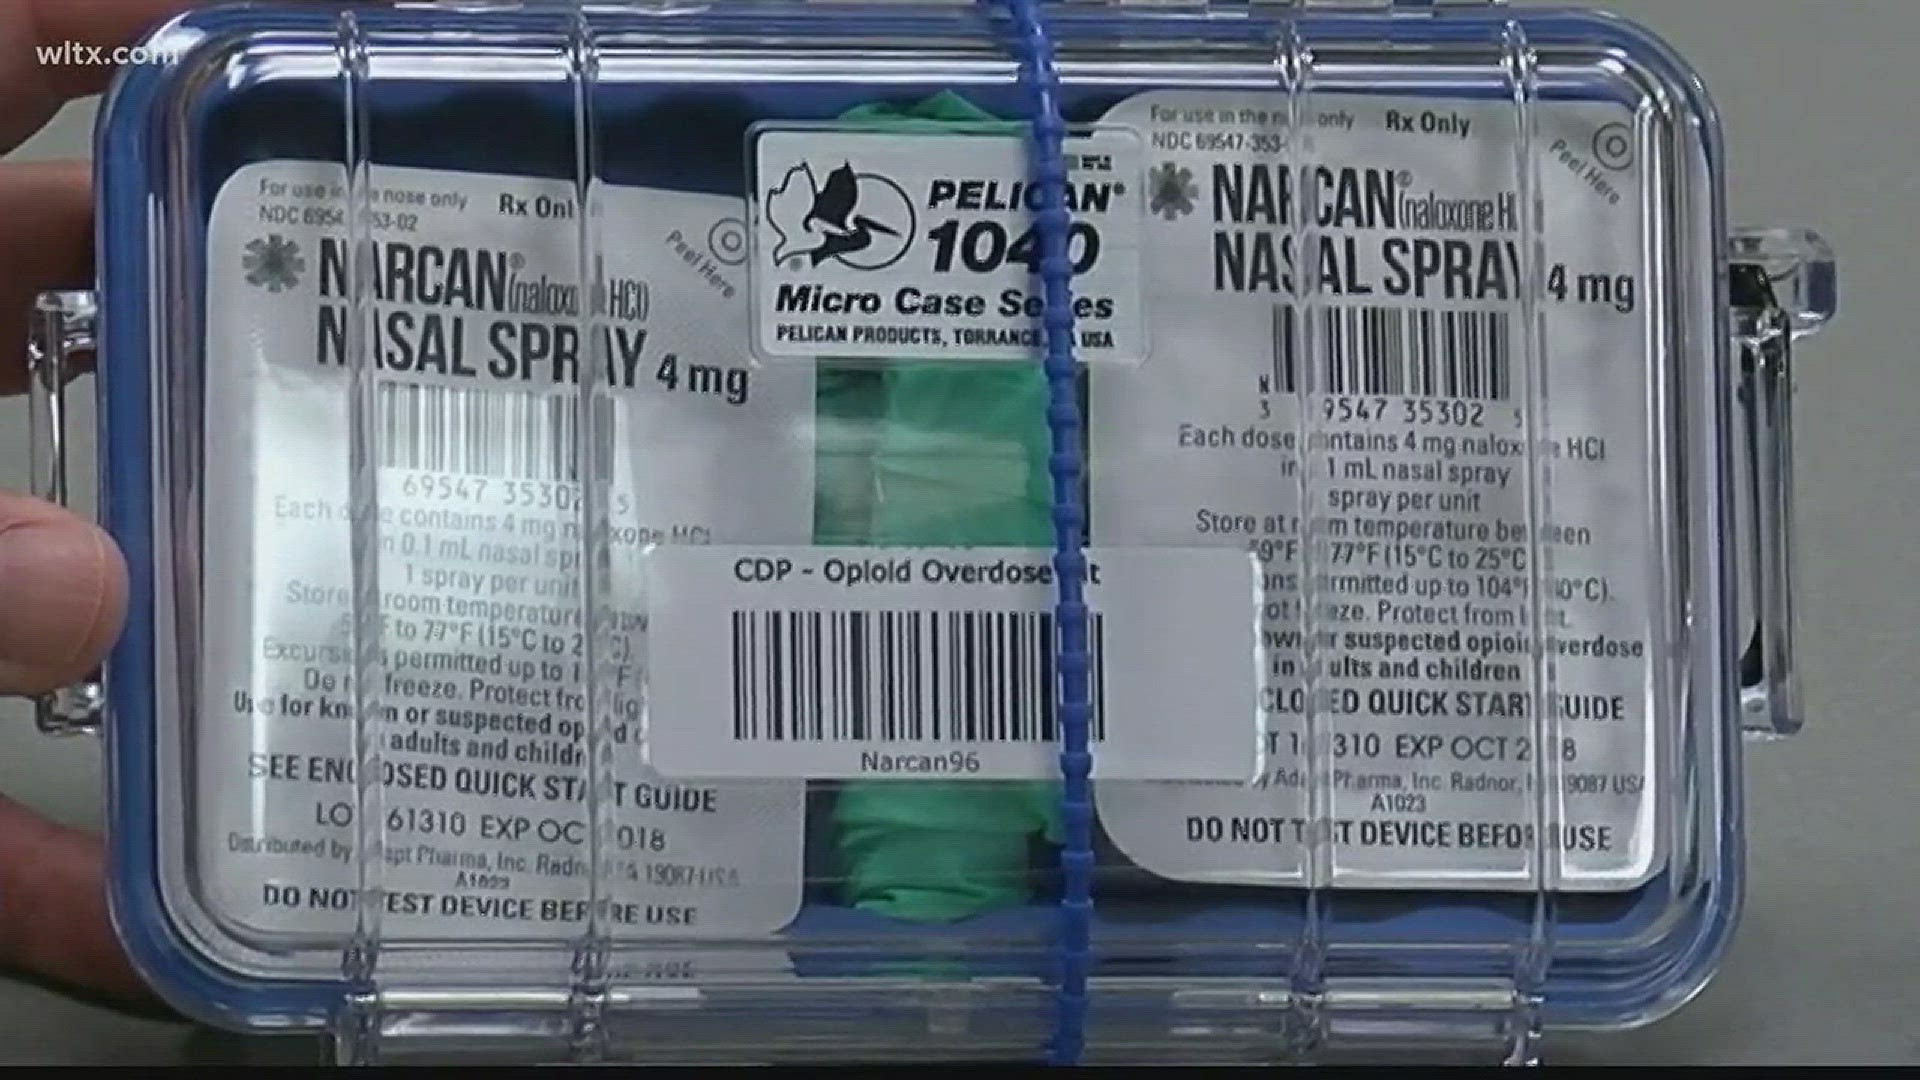 The Bishopville Police department says they had to use Narcan over the weekend to save someone's life who had overdosed on opioids.